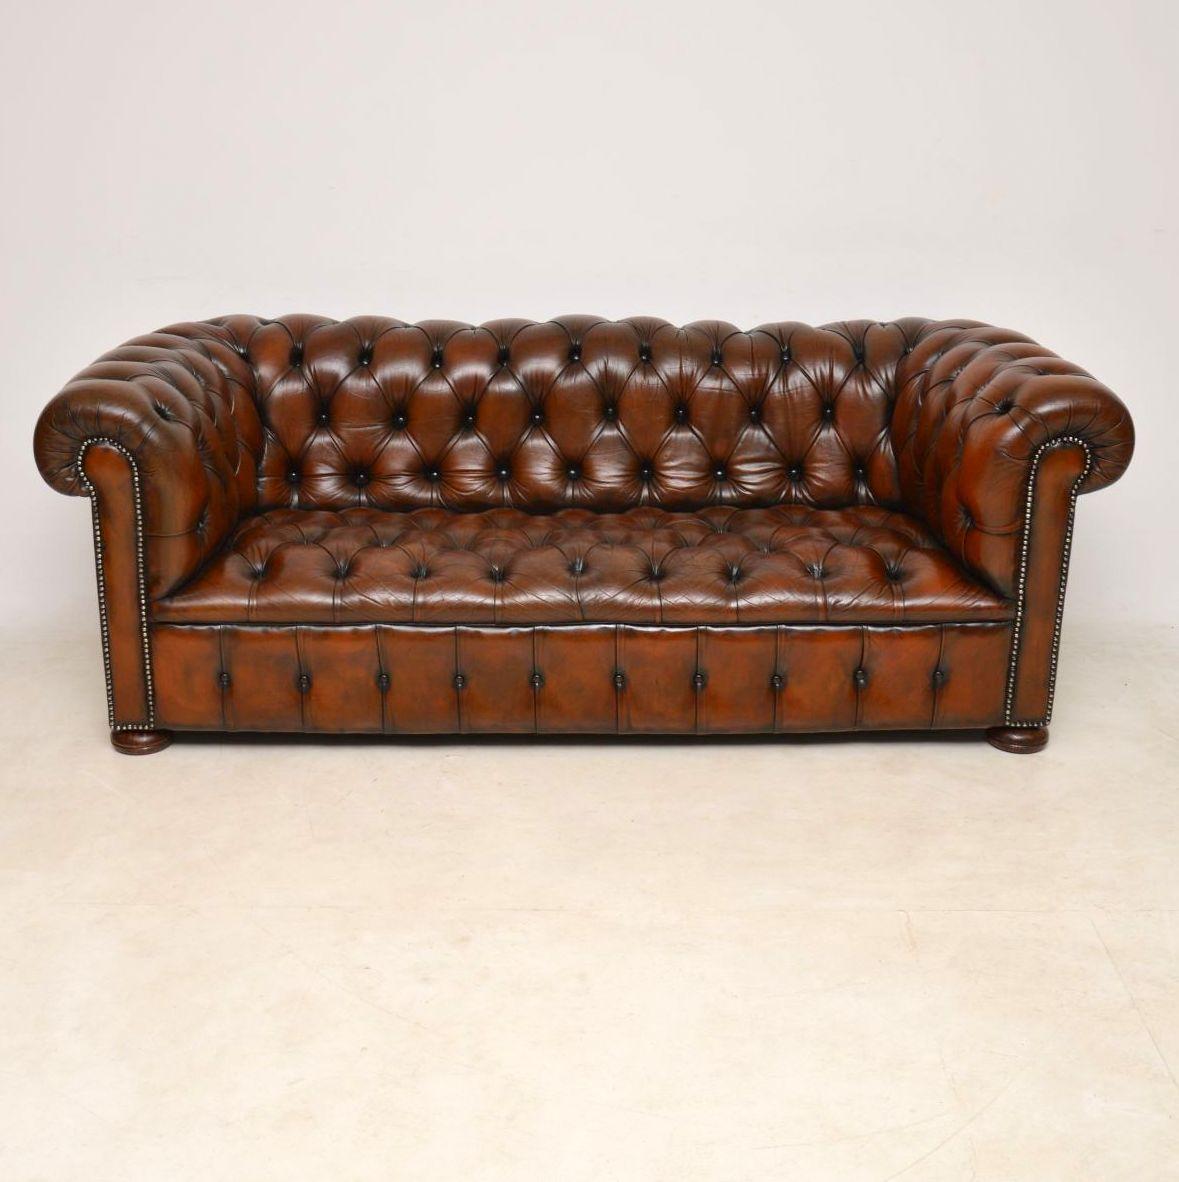 Antique deep buttoned leather Chesterfield three-seat sofa with a wonderful color and plenty of character. It's in good original condition & dates from around the 1920's period. The leather is naturally distressed and there are no rips or tears,